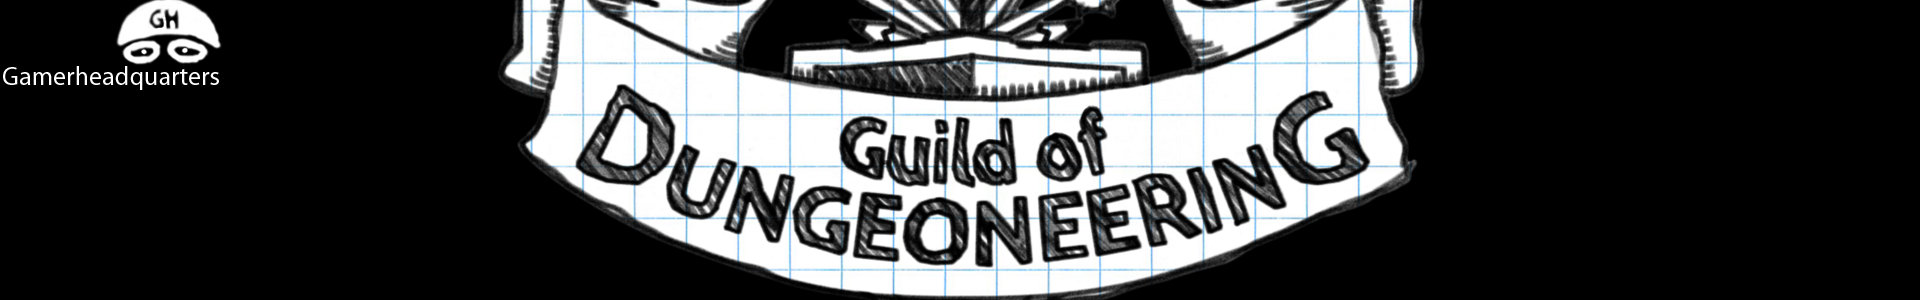 guild of dungeoneering losing to the ducky